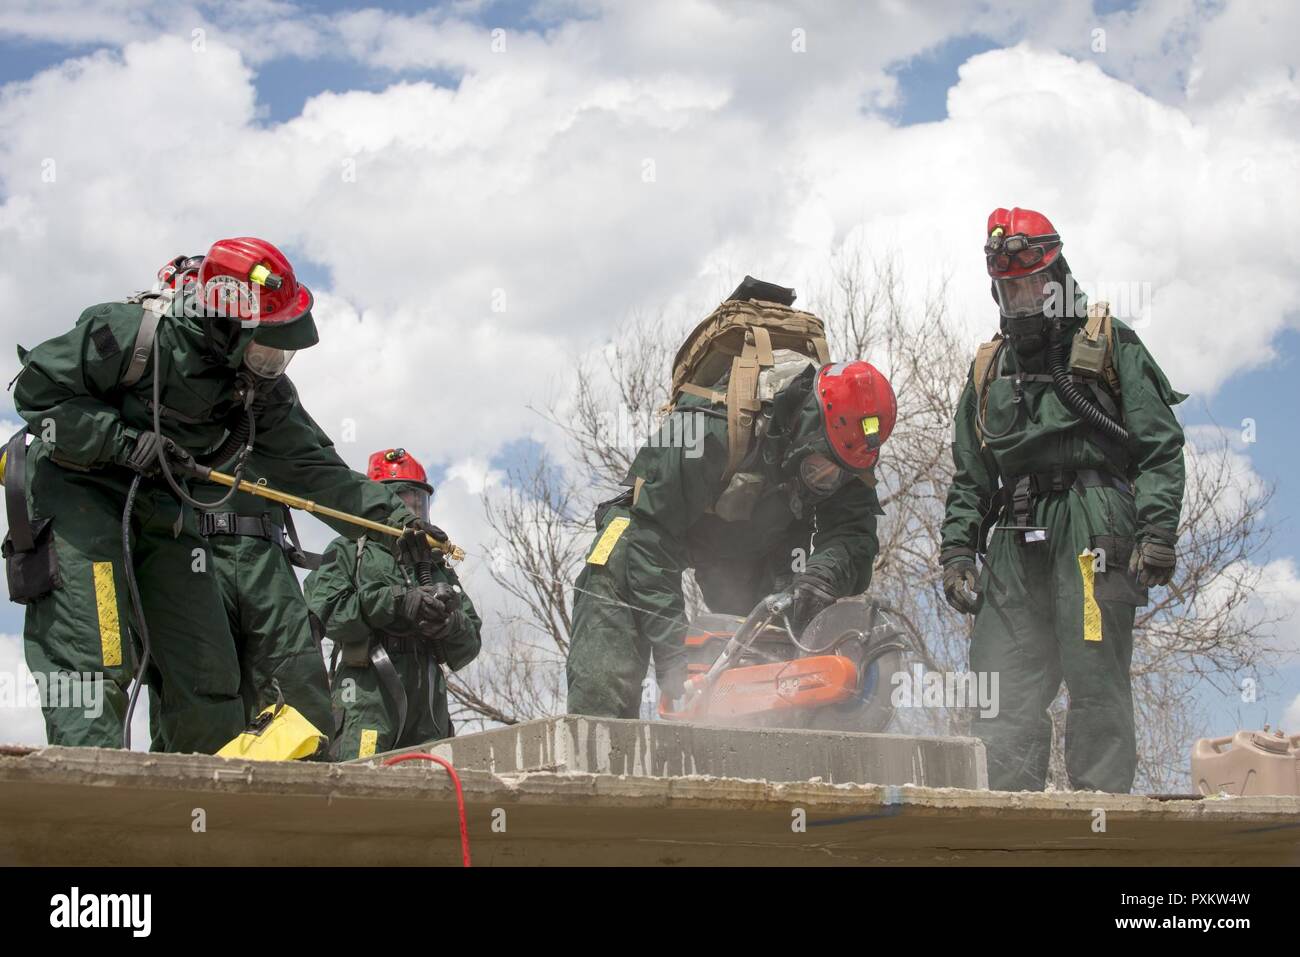 Colorado National Guard Airman of the Fatality Search and Rescue Team, practice cutting through concrete for a simulated collapsed structure exercise in Lakewood, Colo., June 3, 2017. The CONG Chemical, Biological, Radiological and Nuclear Enhanced Response Force Package team of more than 100 CONG Soldiers/Airman, First Responders, evaluators, and role-players, in conjunction with the West Metro Fire District, participated in this major emergency response exercise involving simulated exposure to contaminated environments, collapsed structures and medical triage, giving CONG members the most re Stock Photo